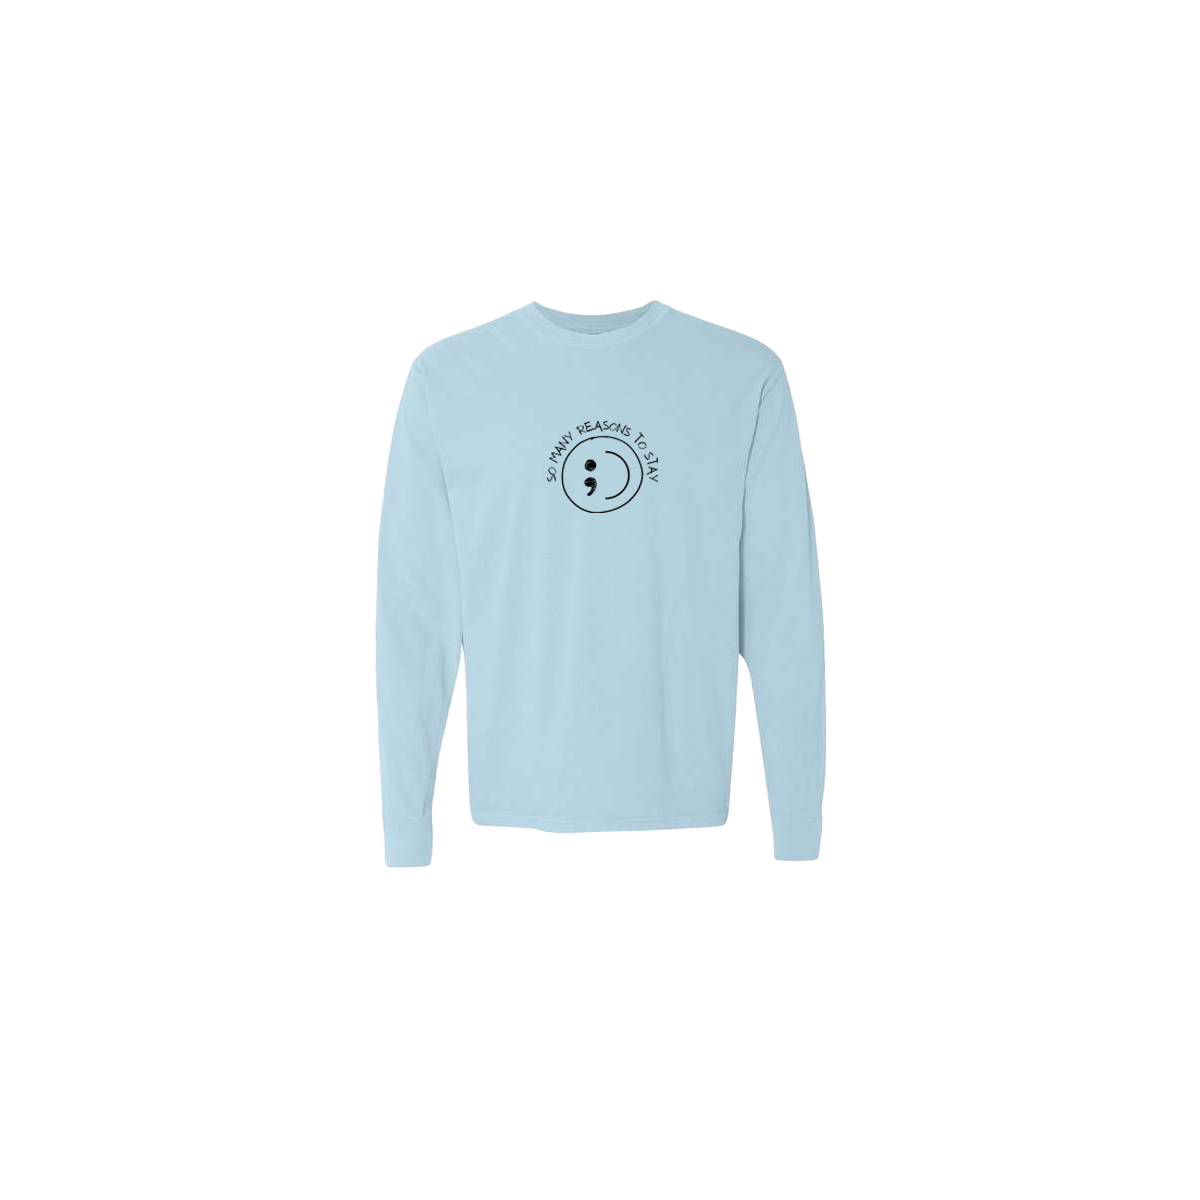 So Many Reasons to Stay Embroidered Light Blue Long Sleeve Tshirt - Mental Health Awareness Clothing